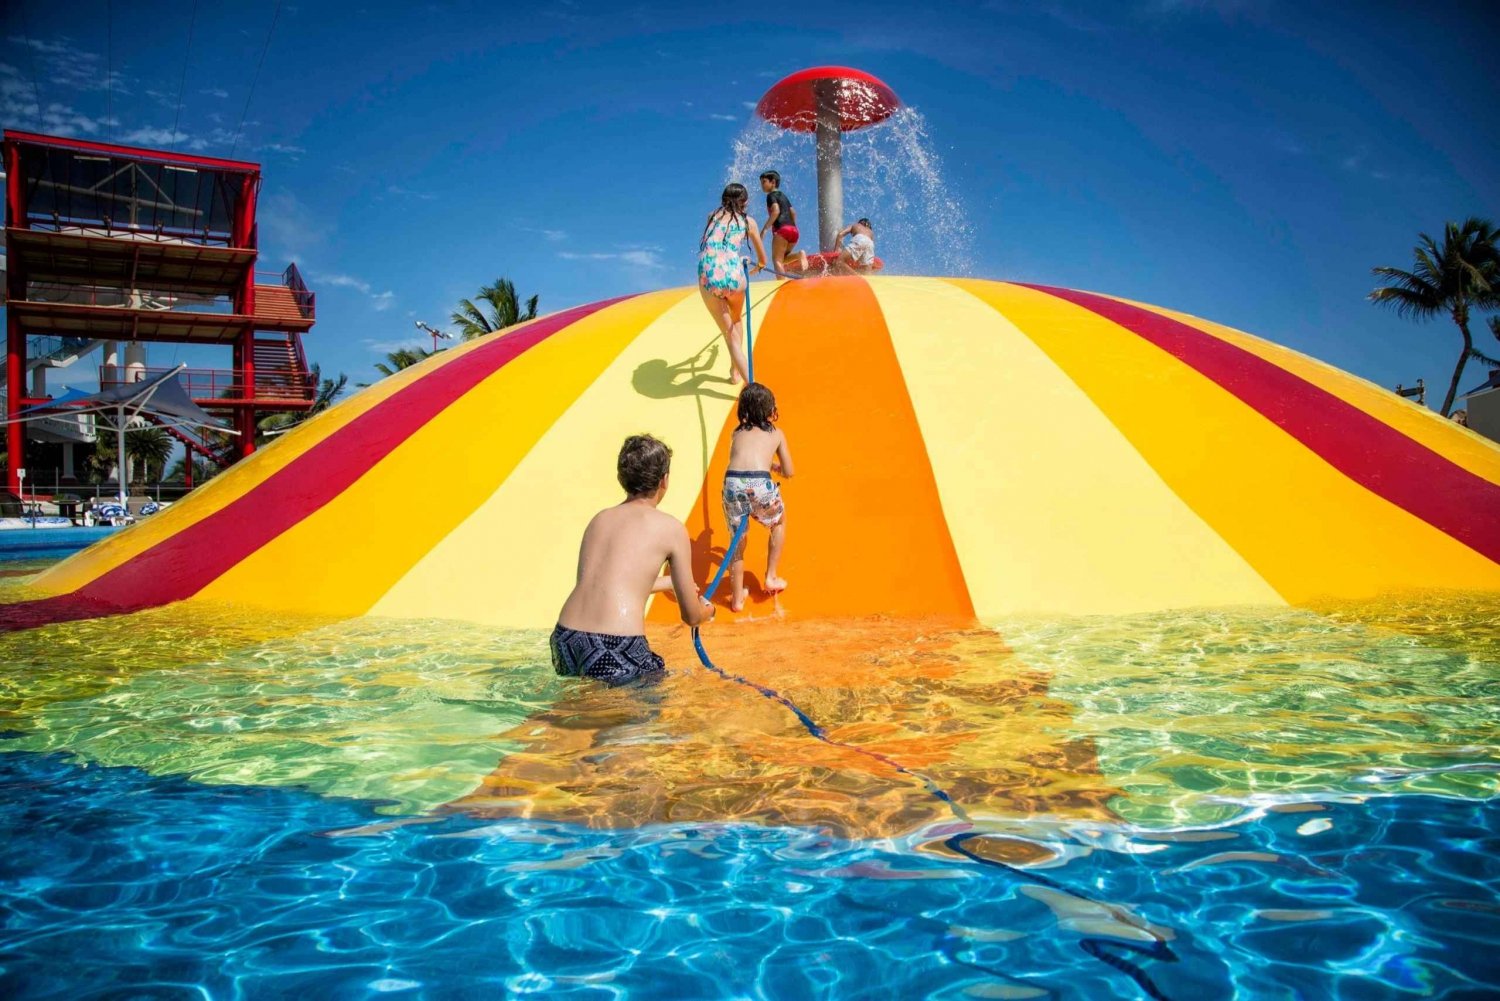 Best water activities in Hotel Zone, Cancun, Mexico